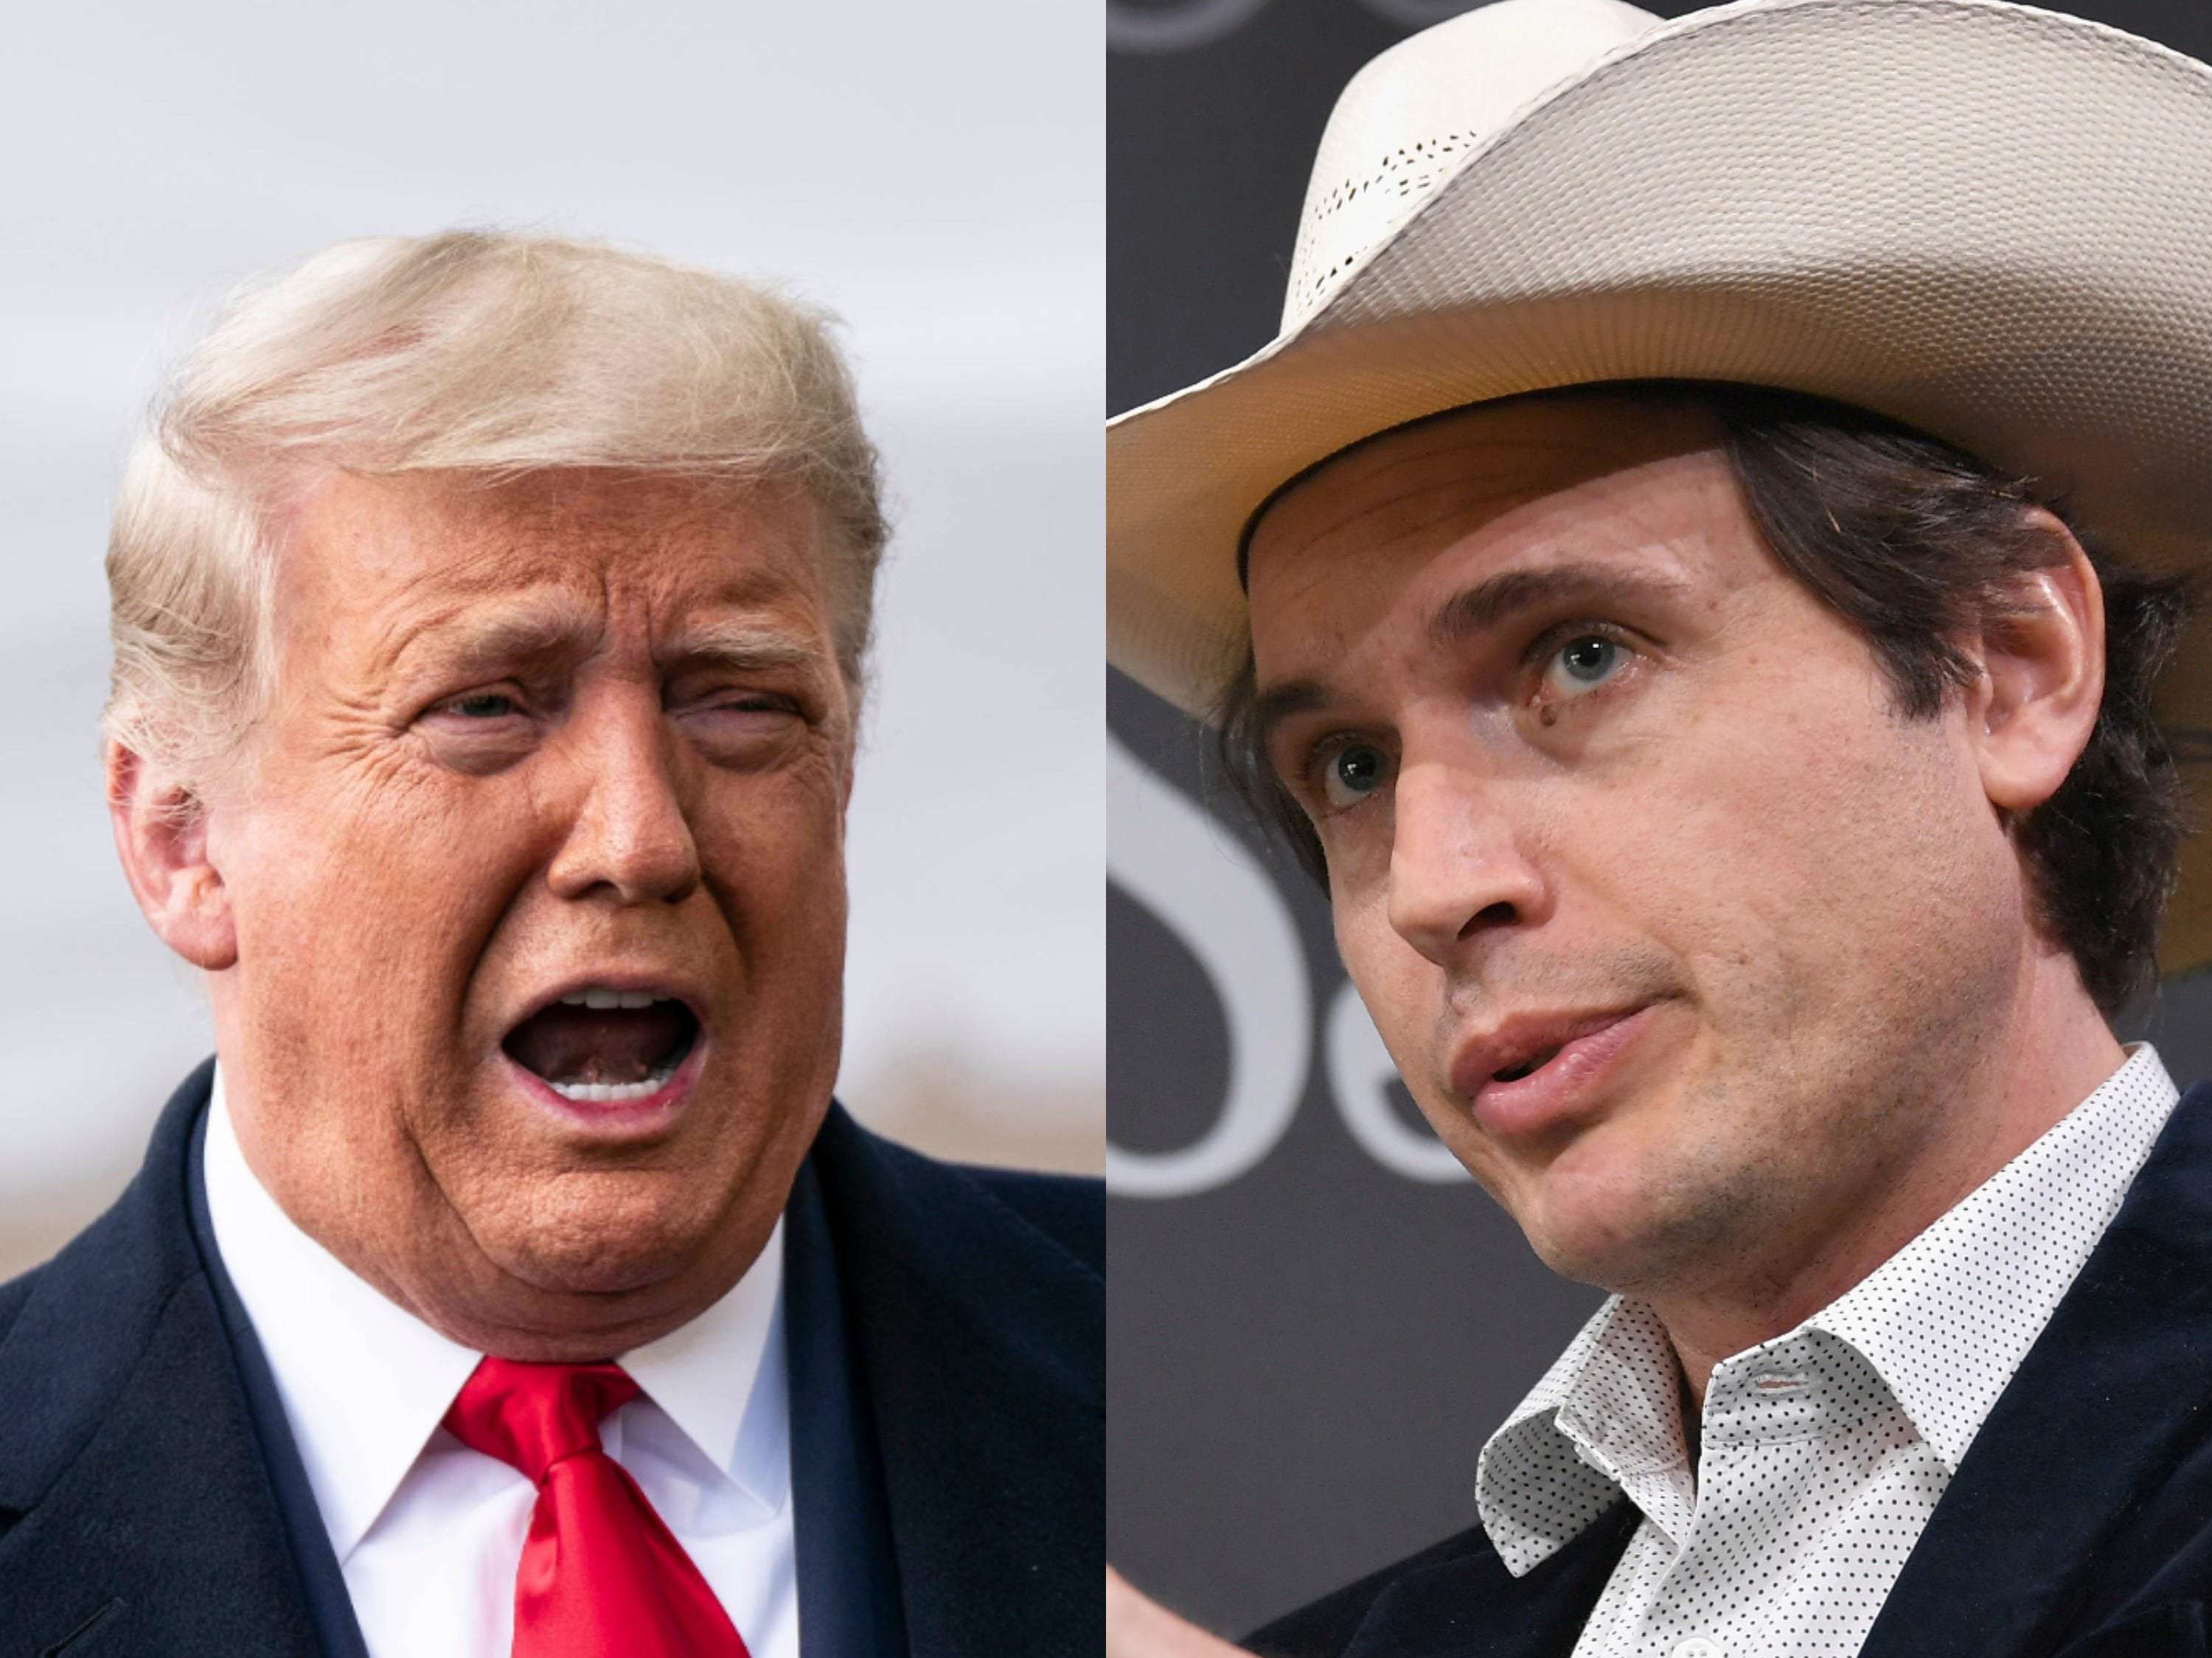 image for Elon Musk's brother Kimbal Musk, typically a Democrat donor, gave $2,800 to each GOP lawmaker who voted to impeach Trump